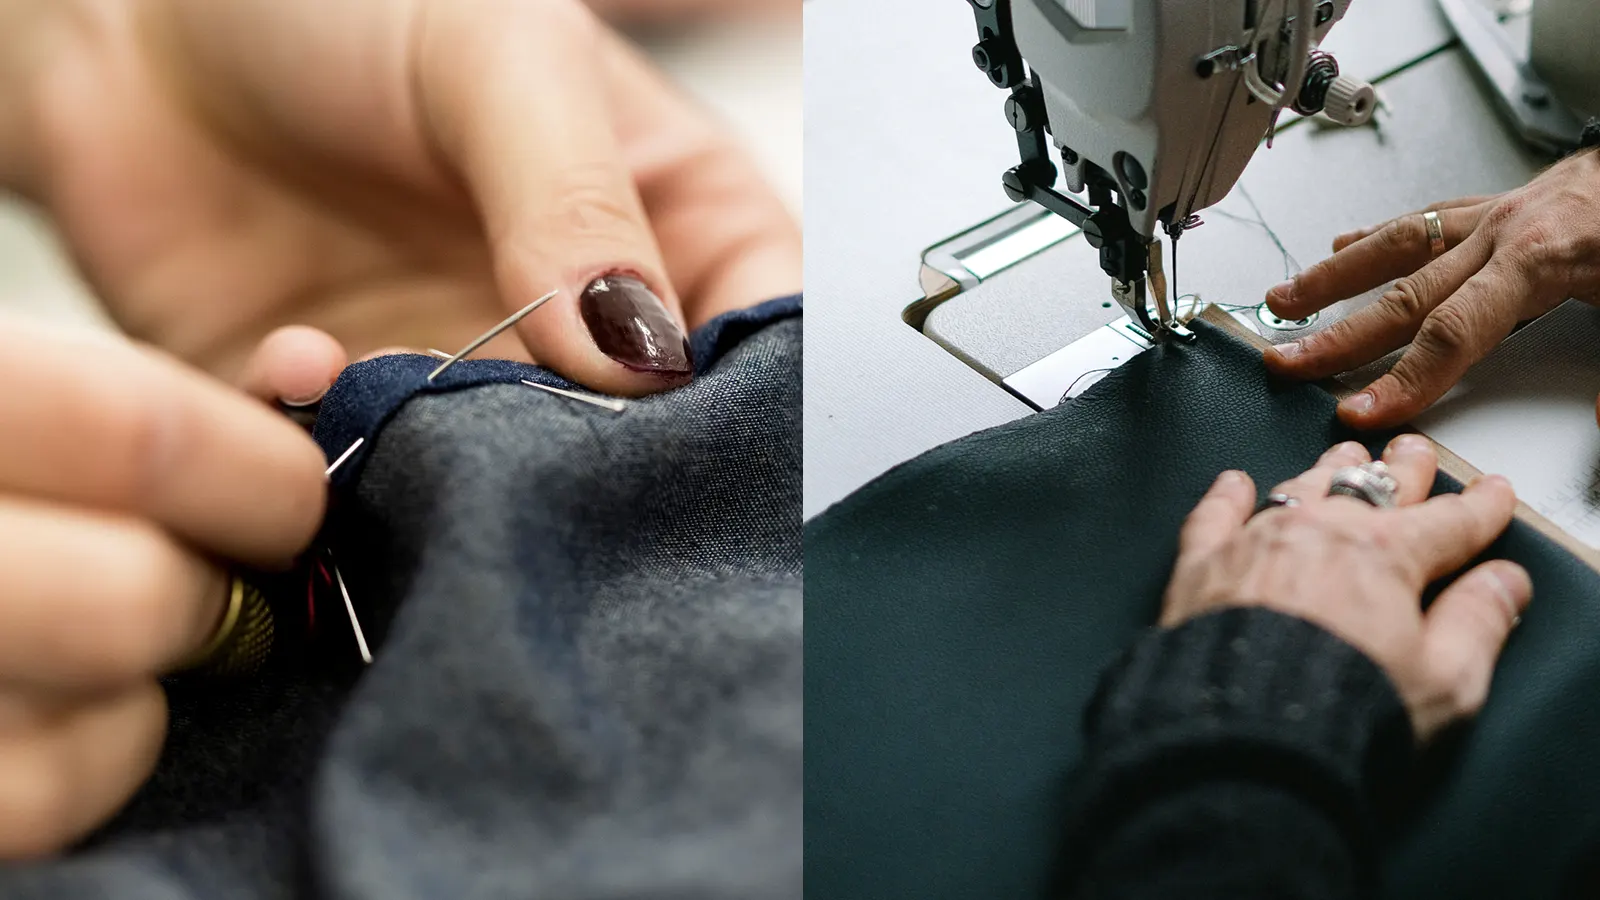 How to Baste Sewing: Sewing Basics for Basting Stitches